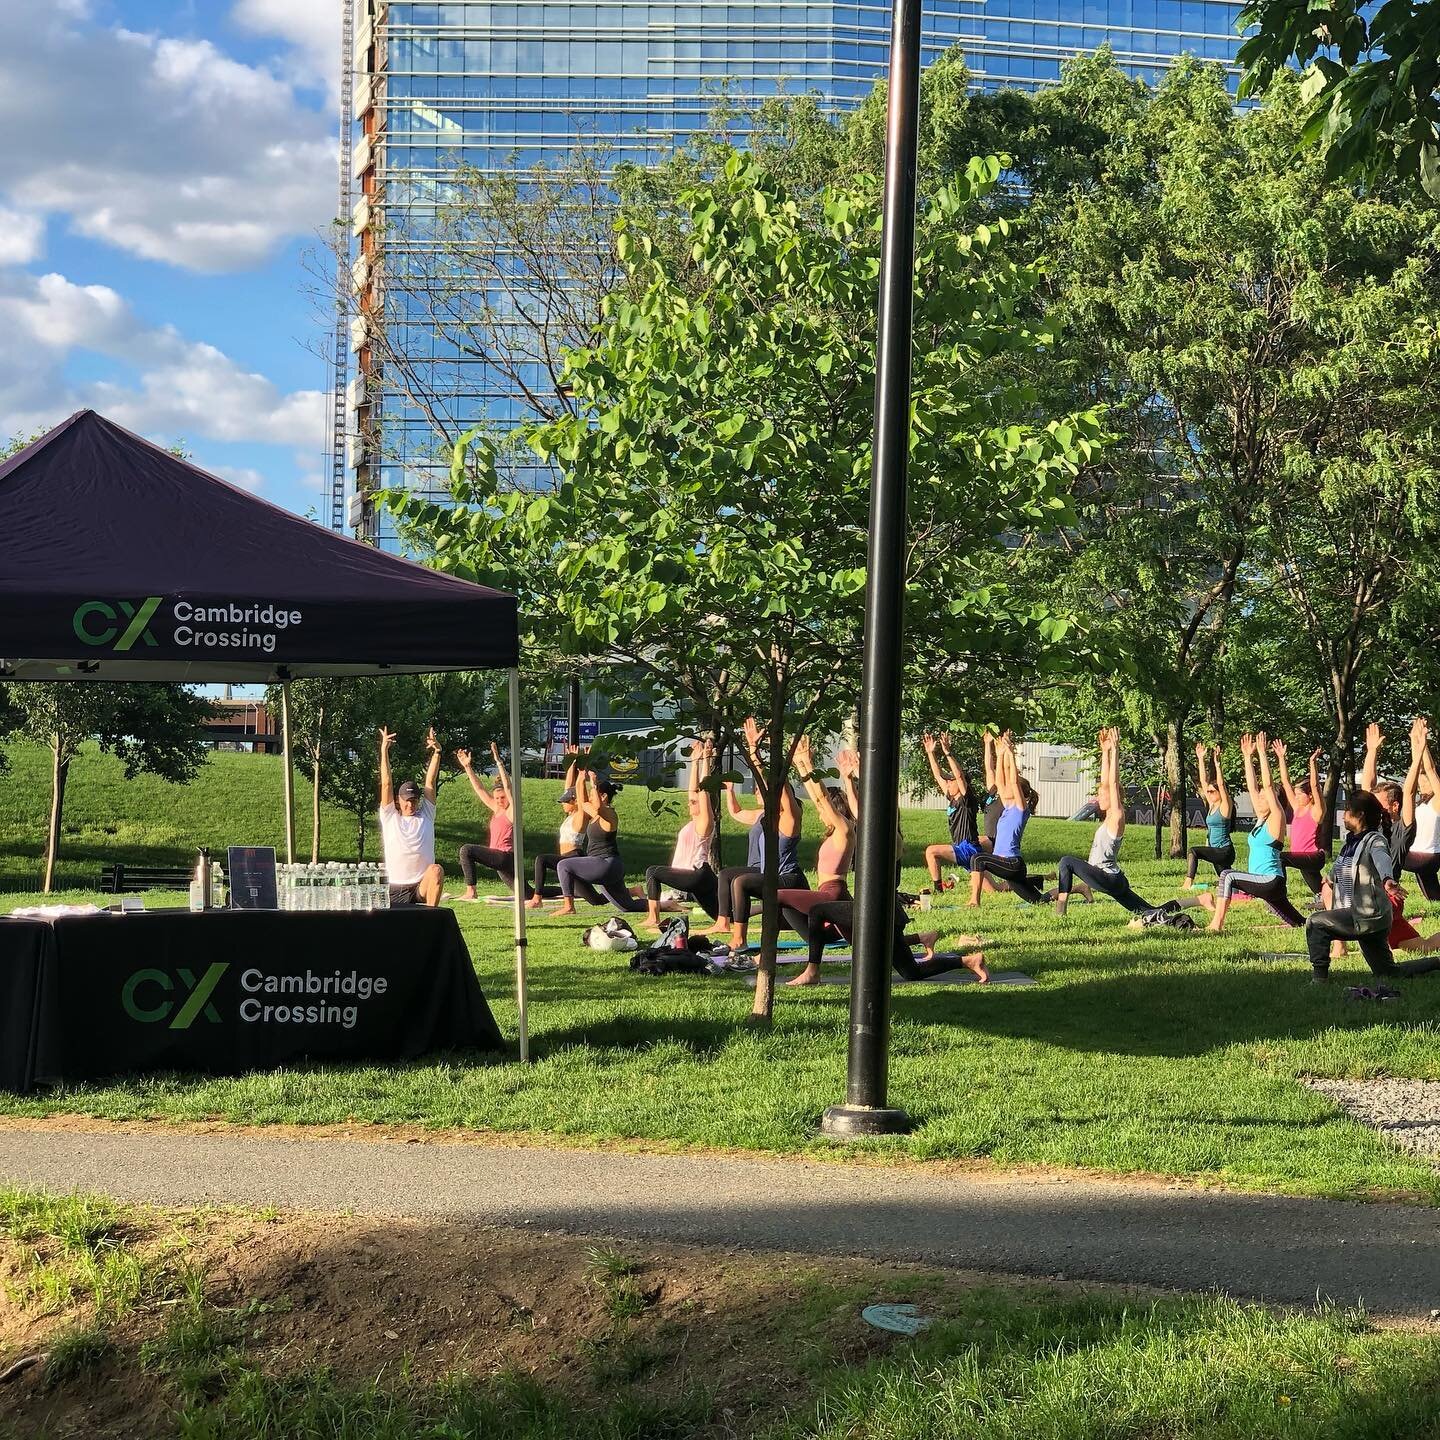 FREE EVENT ALERT!! 🚨 
.
We are so excited about our CX FIT series this year in partnership with @cxcambridge 
.
We have an amazing lineup of events -
Every Wednesday at 6pm and Saturday at 10am
all summer long, with DJ&rsquo;s, raffle giveaways, and